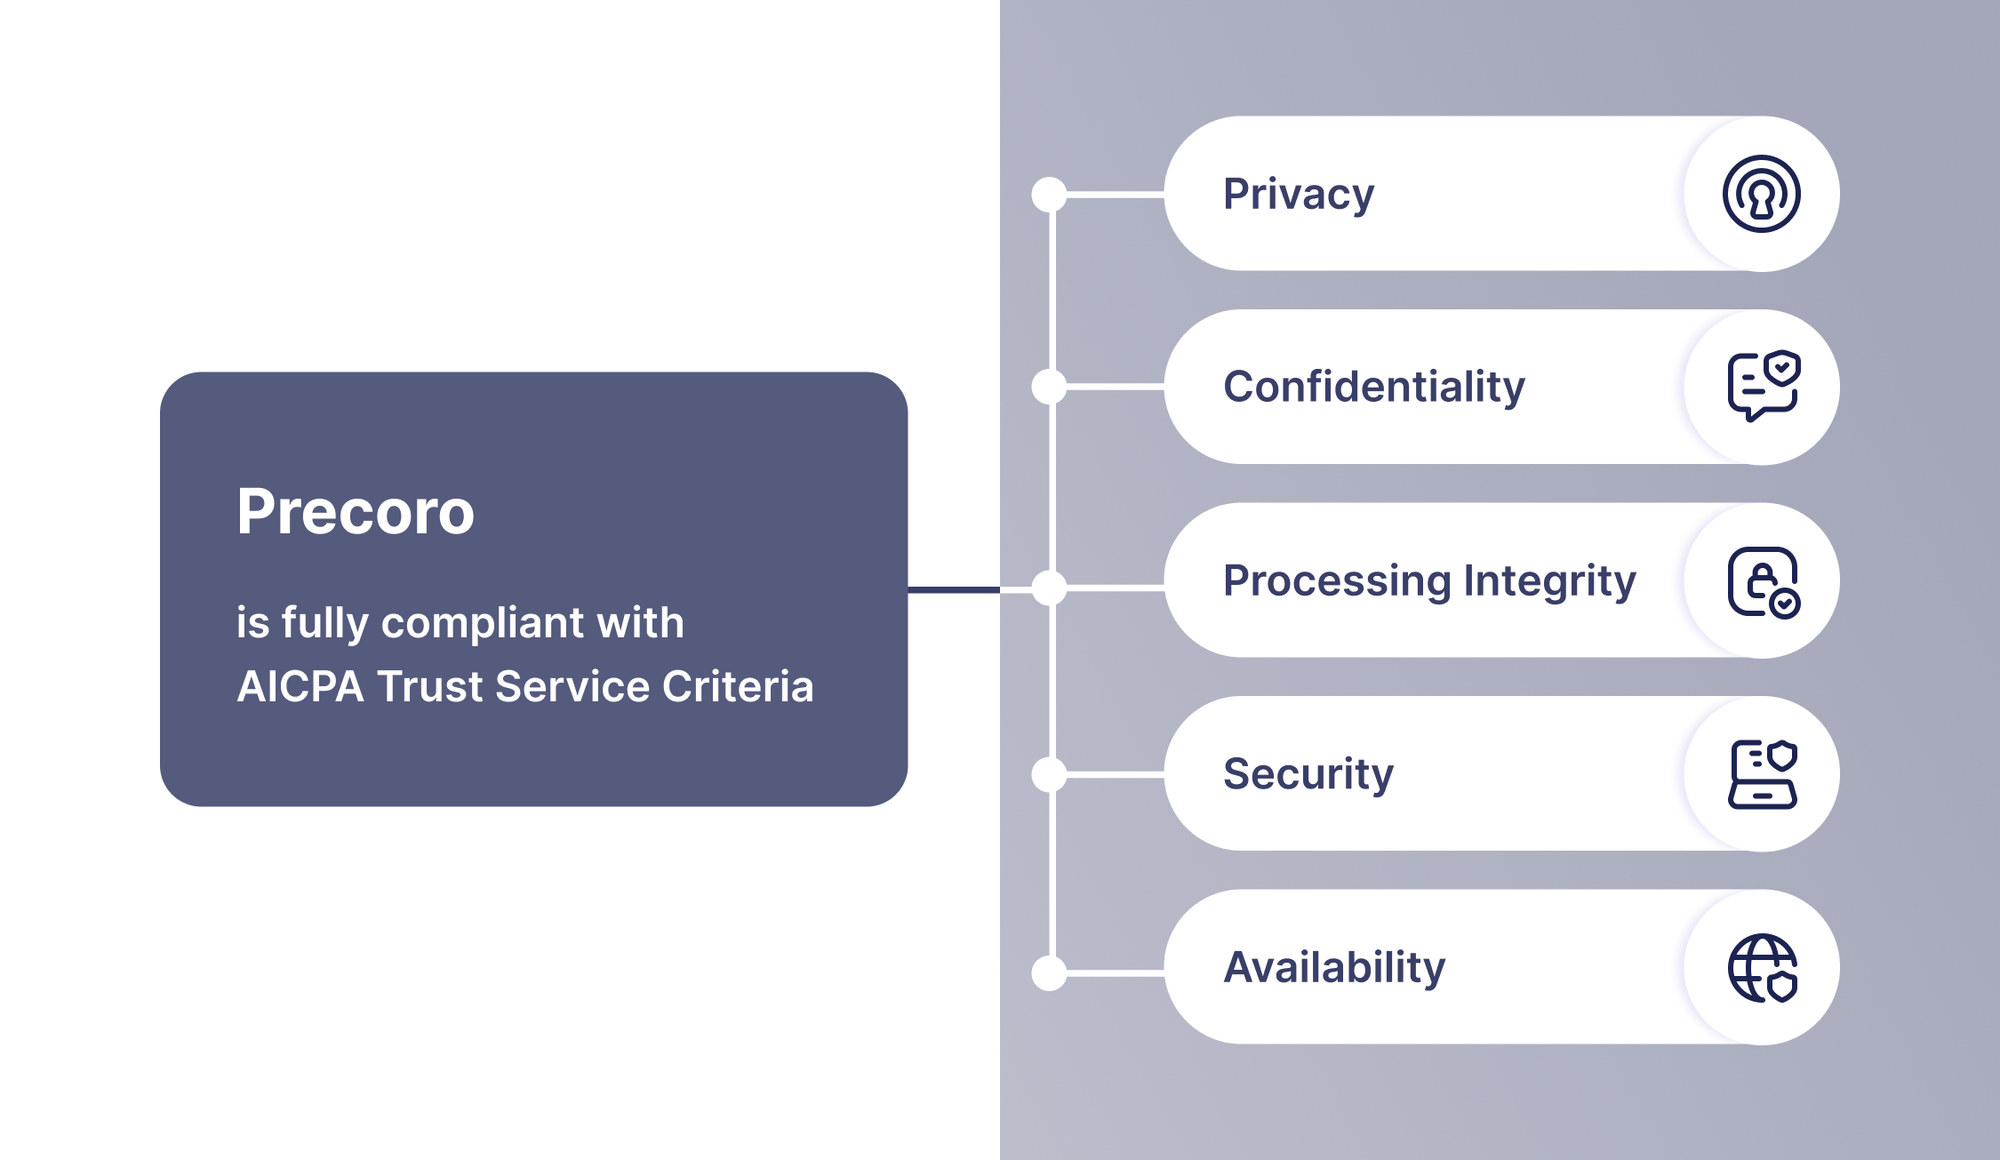 Securing Trust: Precoro Achieves Full Compliance with the SOC 2 Standards